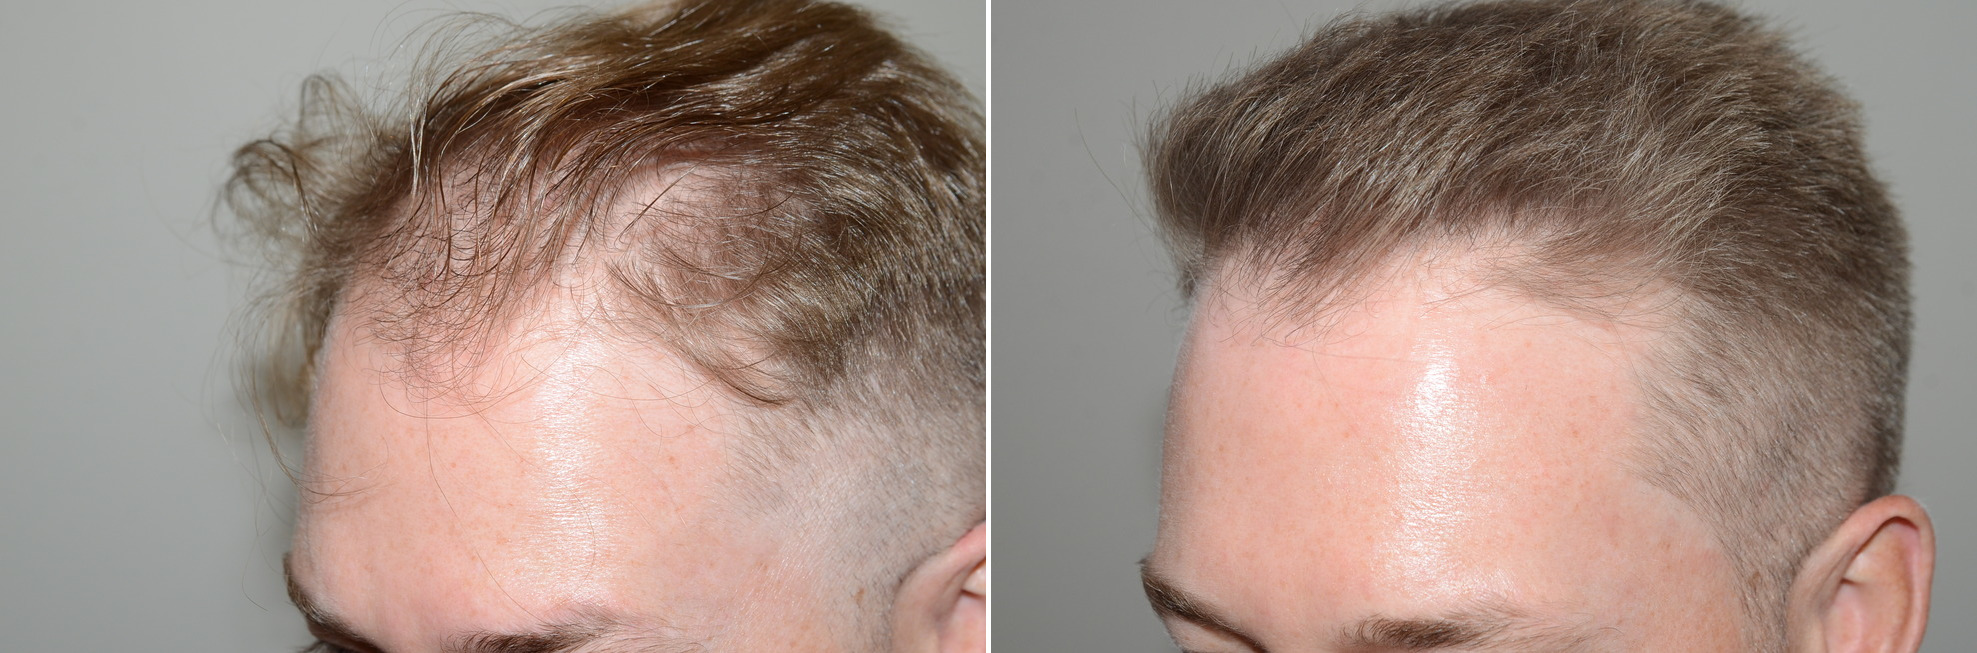 Hair Transplants for Men Before and After Photos - Foundation For Hair  Restoration